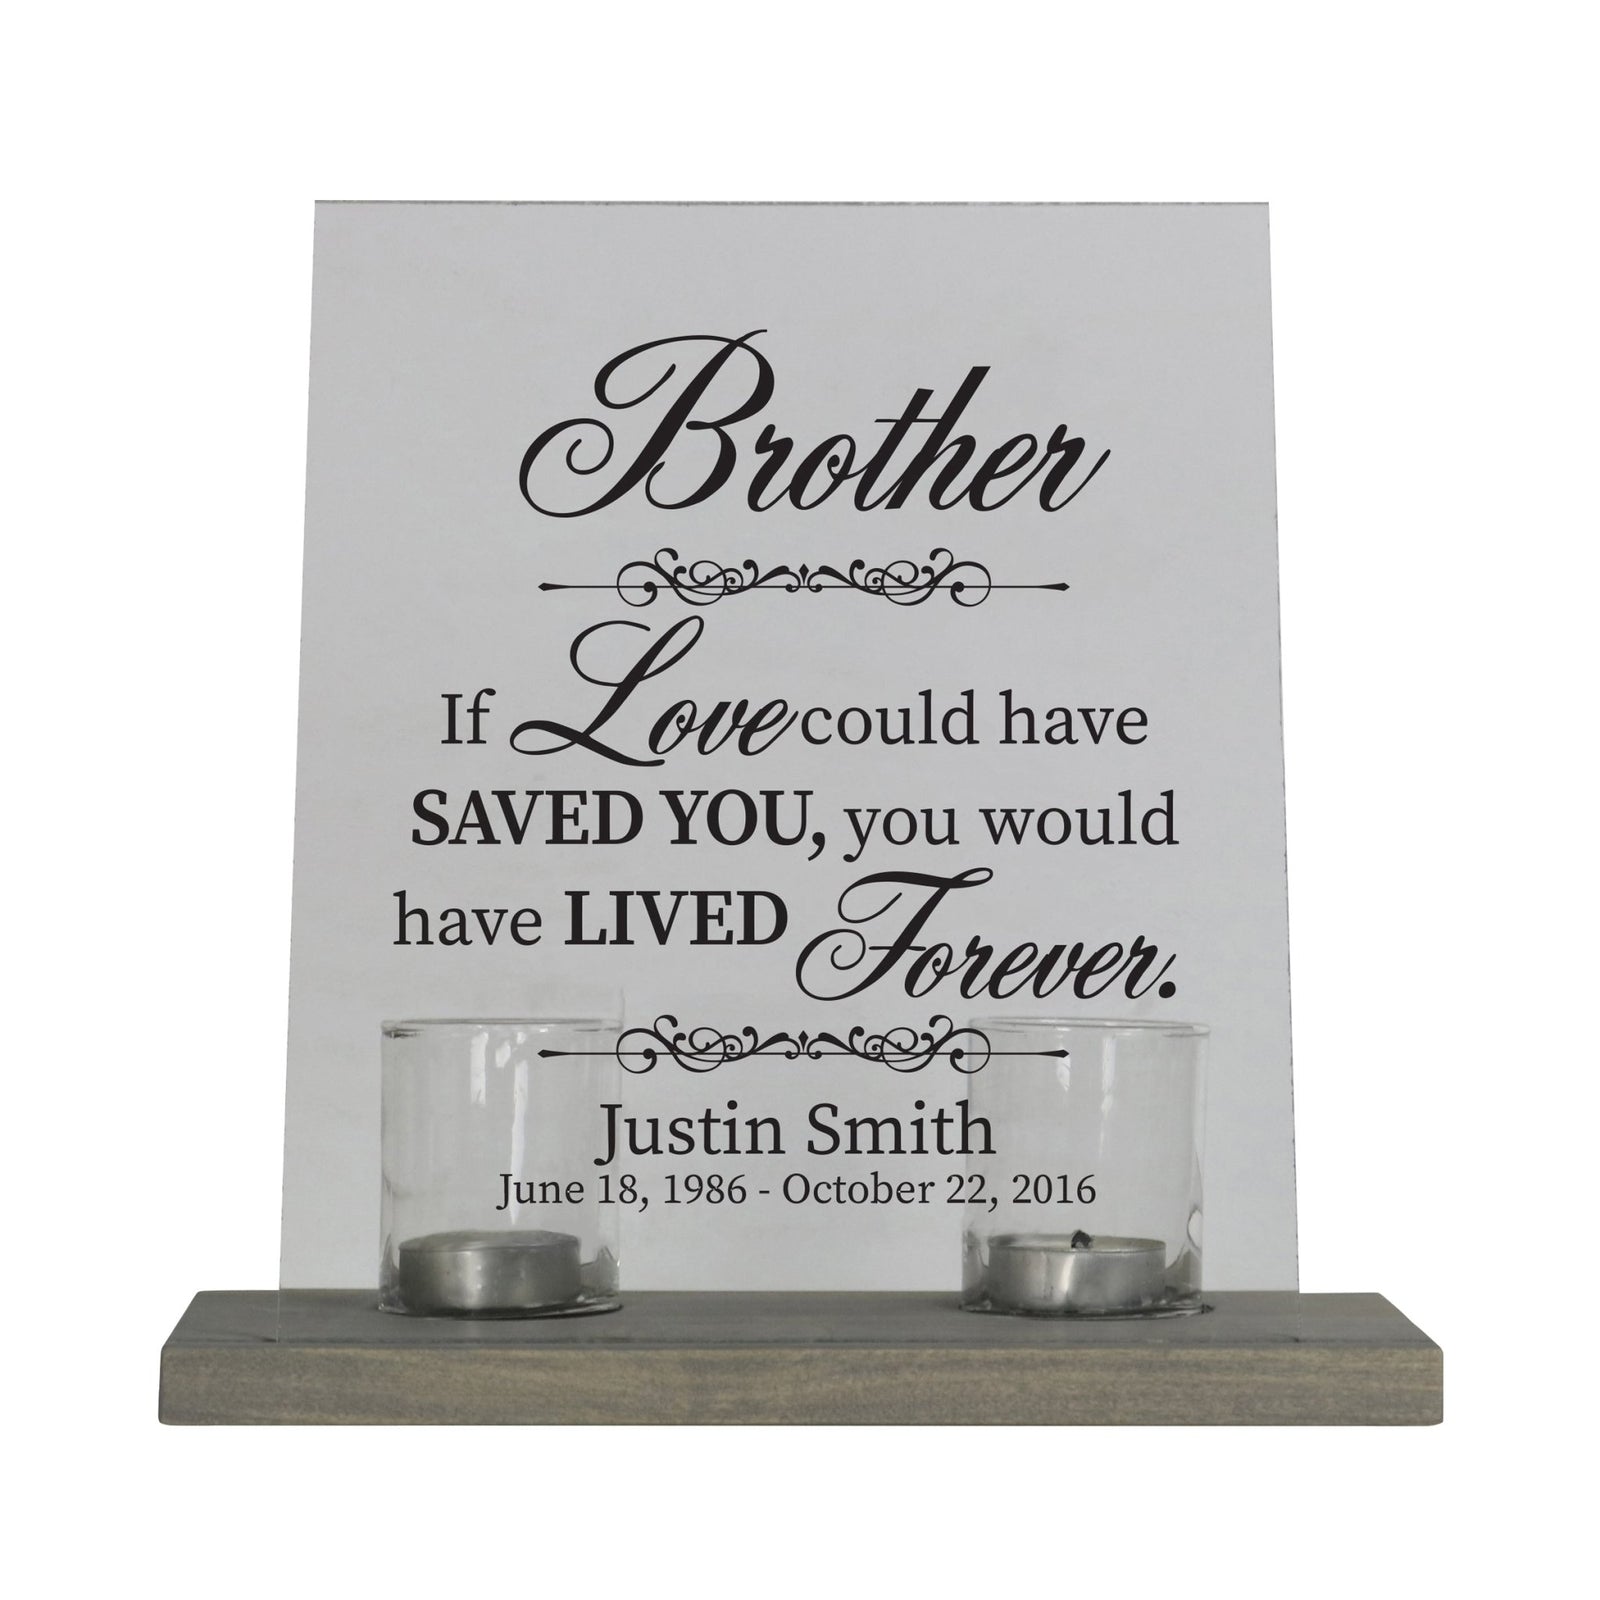 Personalized Memorial Acrylic Sign 8x10 with Votive Candle Holder If Love Could - LifeSong Milestones